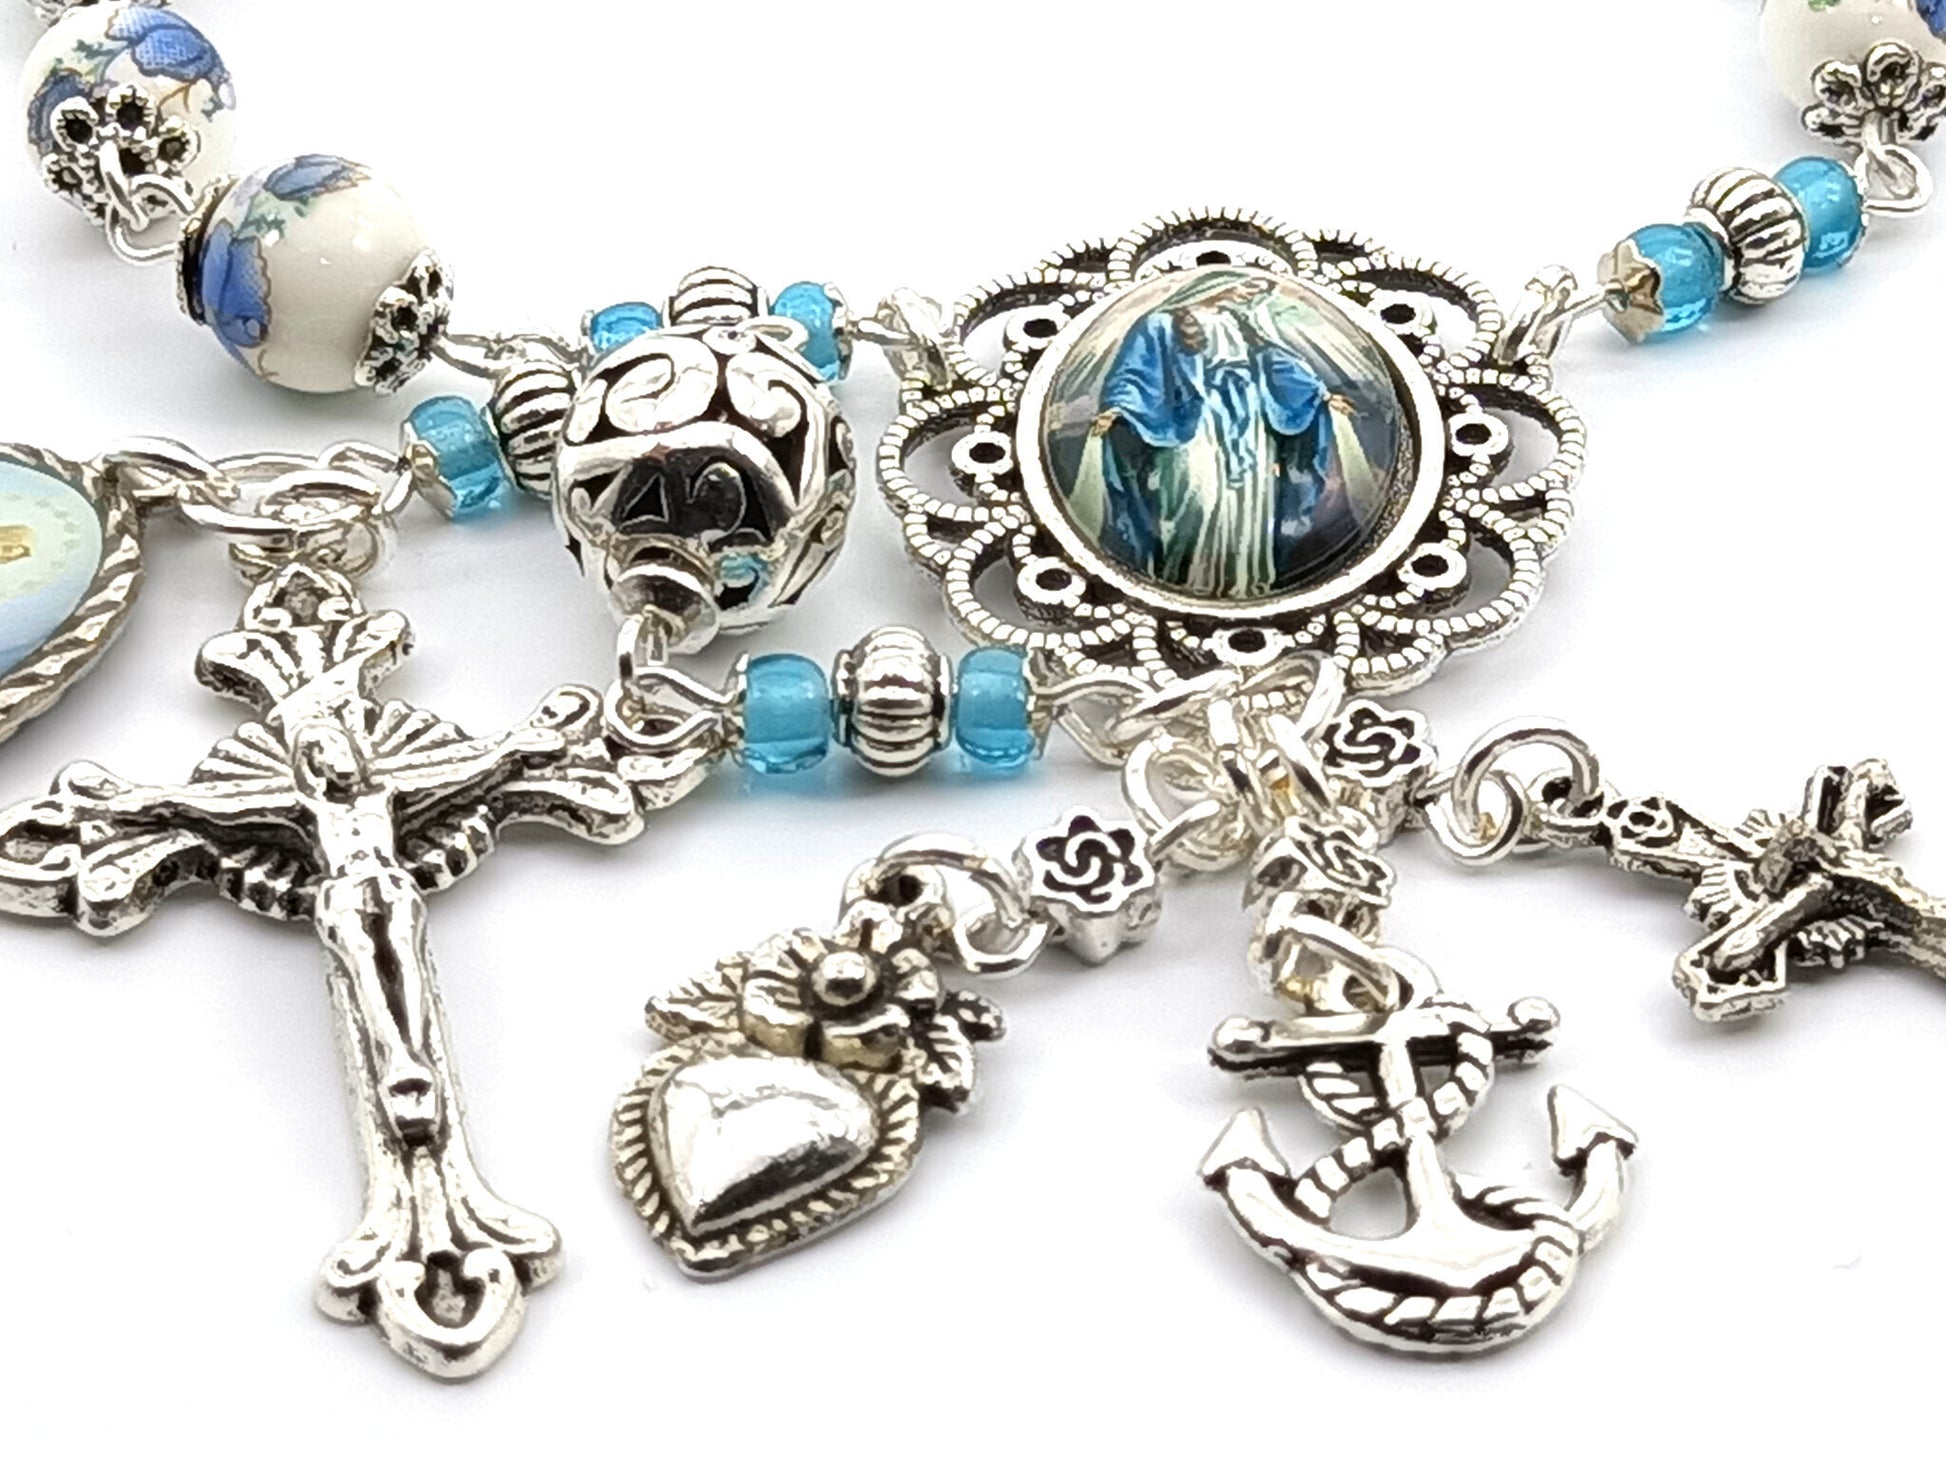 Our Lady of Grace unique rosary beads single decade with porcelain and silver beads, silver crucifix, small medals and picture centre medal.